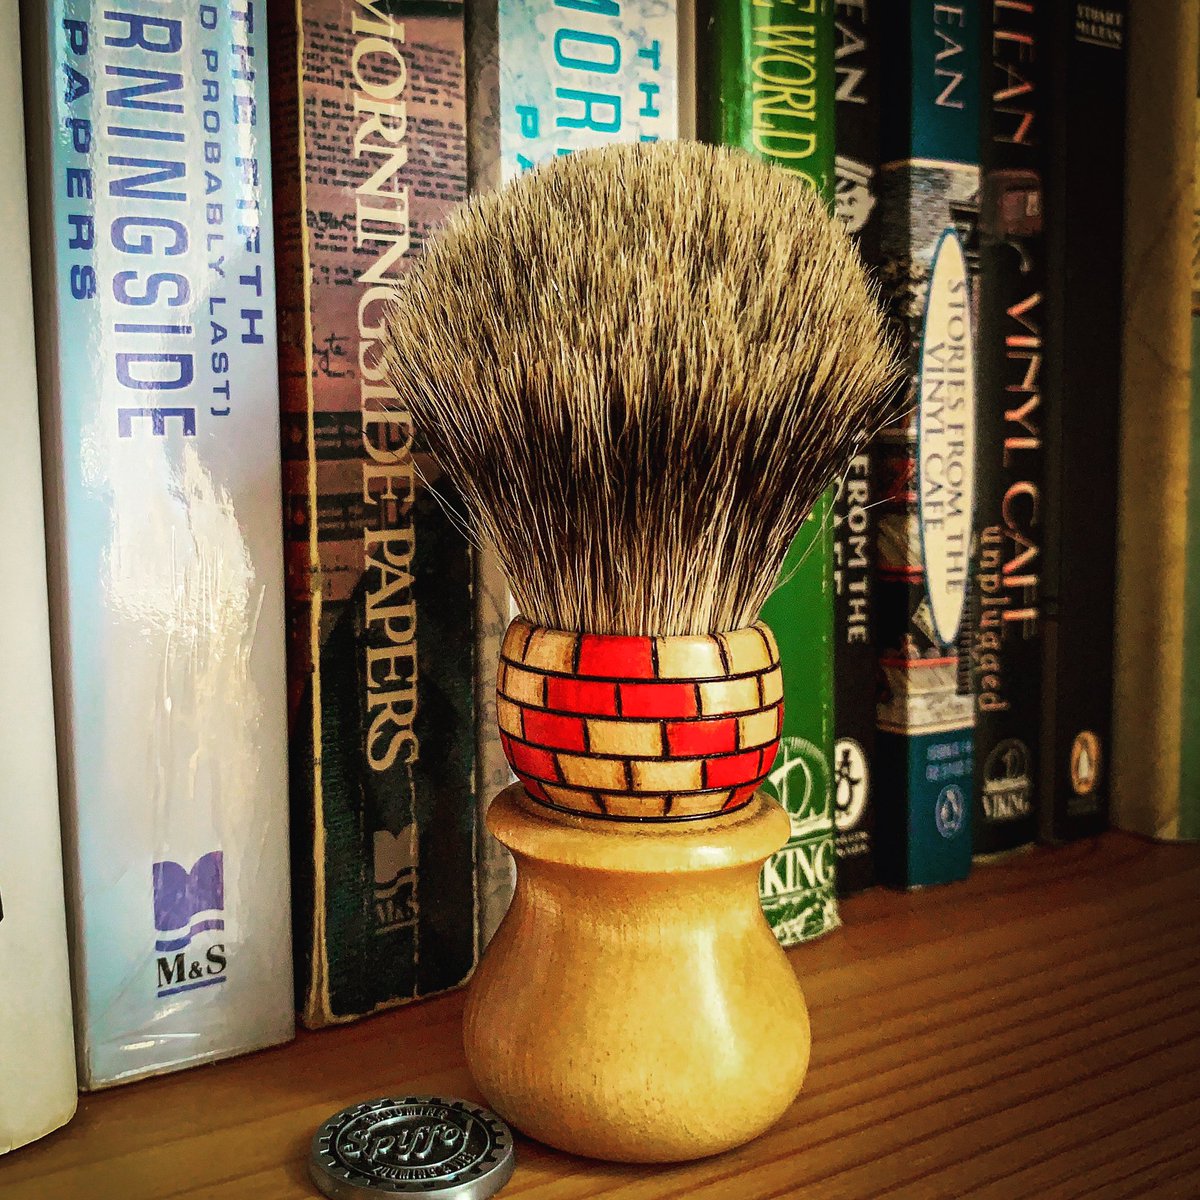 Mente, with its red and natural basket weave ferrule and Gumdrop-style all wood Maple handle and 24mm Best badger knot, stands out from the crowd! #wetshaving #shaving #spiffo #traditionalshaving #shavingbrushes #shavingbrush #spiffoman #shavinggear #halifax #novascotia